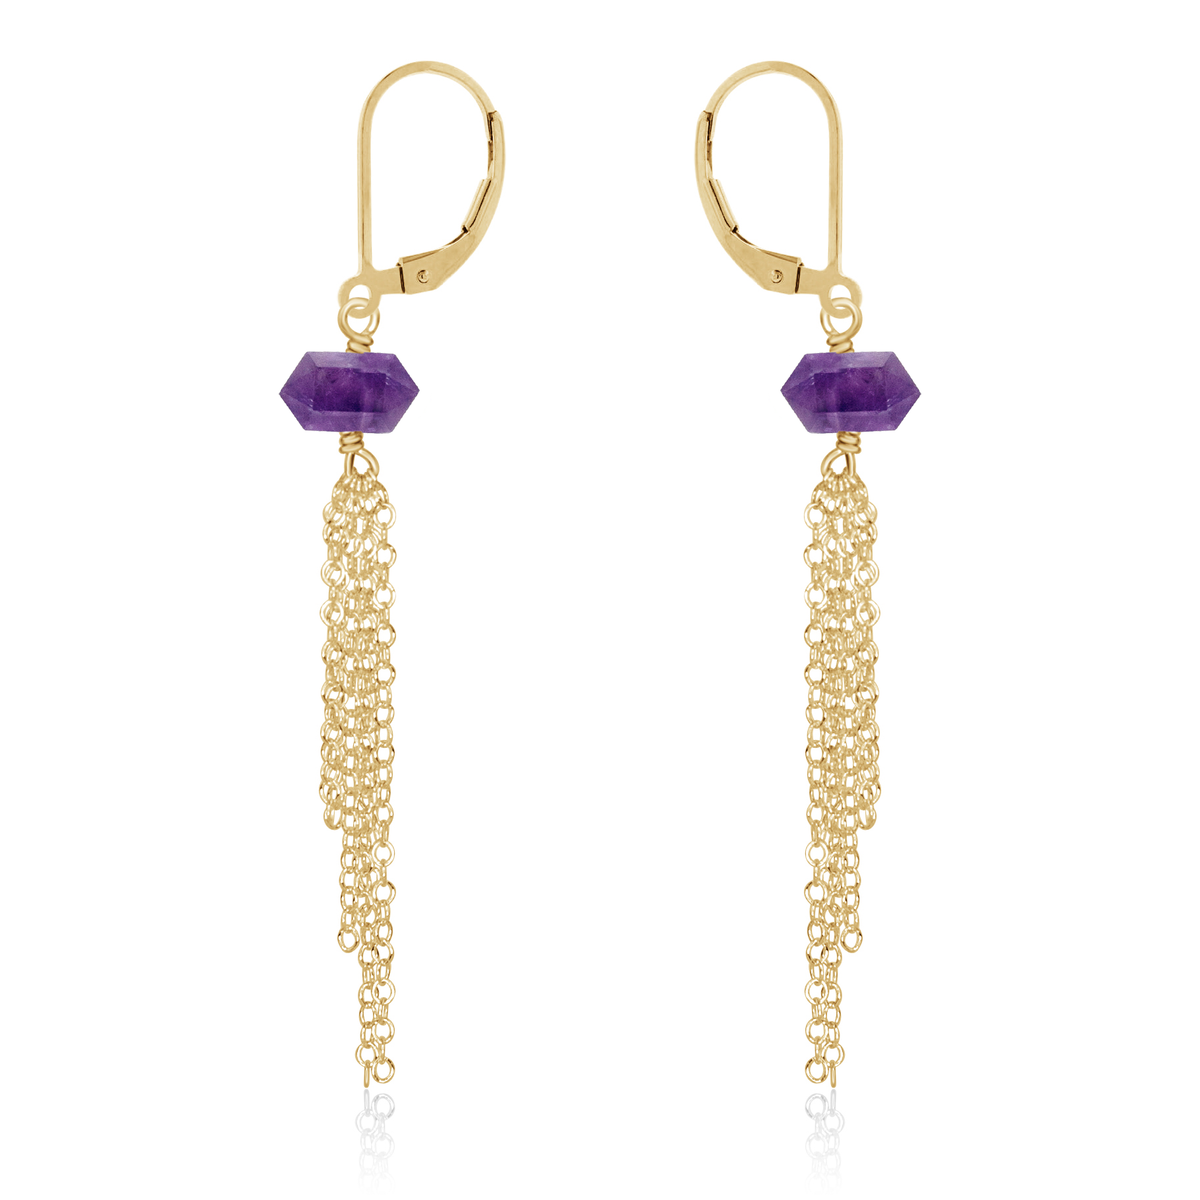 Amethyst Double Terminated Crystal Point Tassel Earrings - Amethyst Double Terminated Crystal Point Tassel Earrings - 14k Gold Fill - Luna Tide Handmade Crystal Jewellery